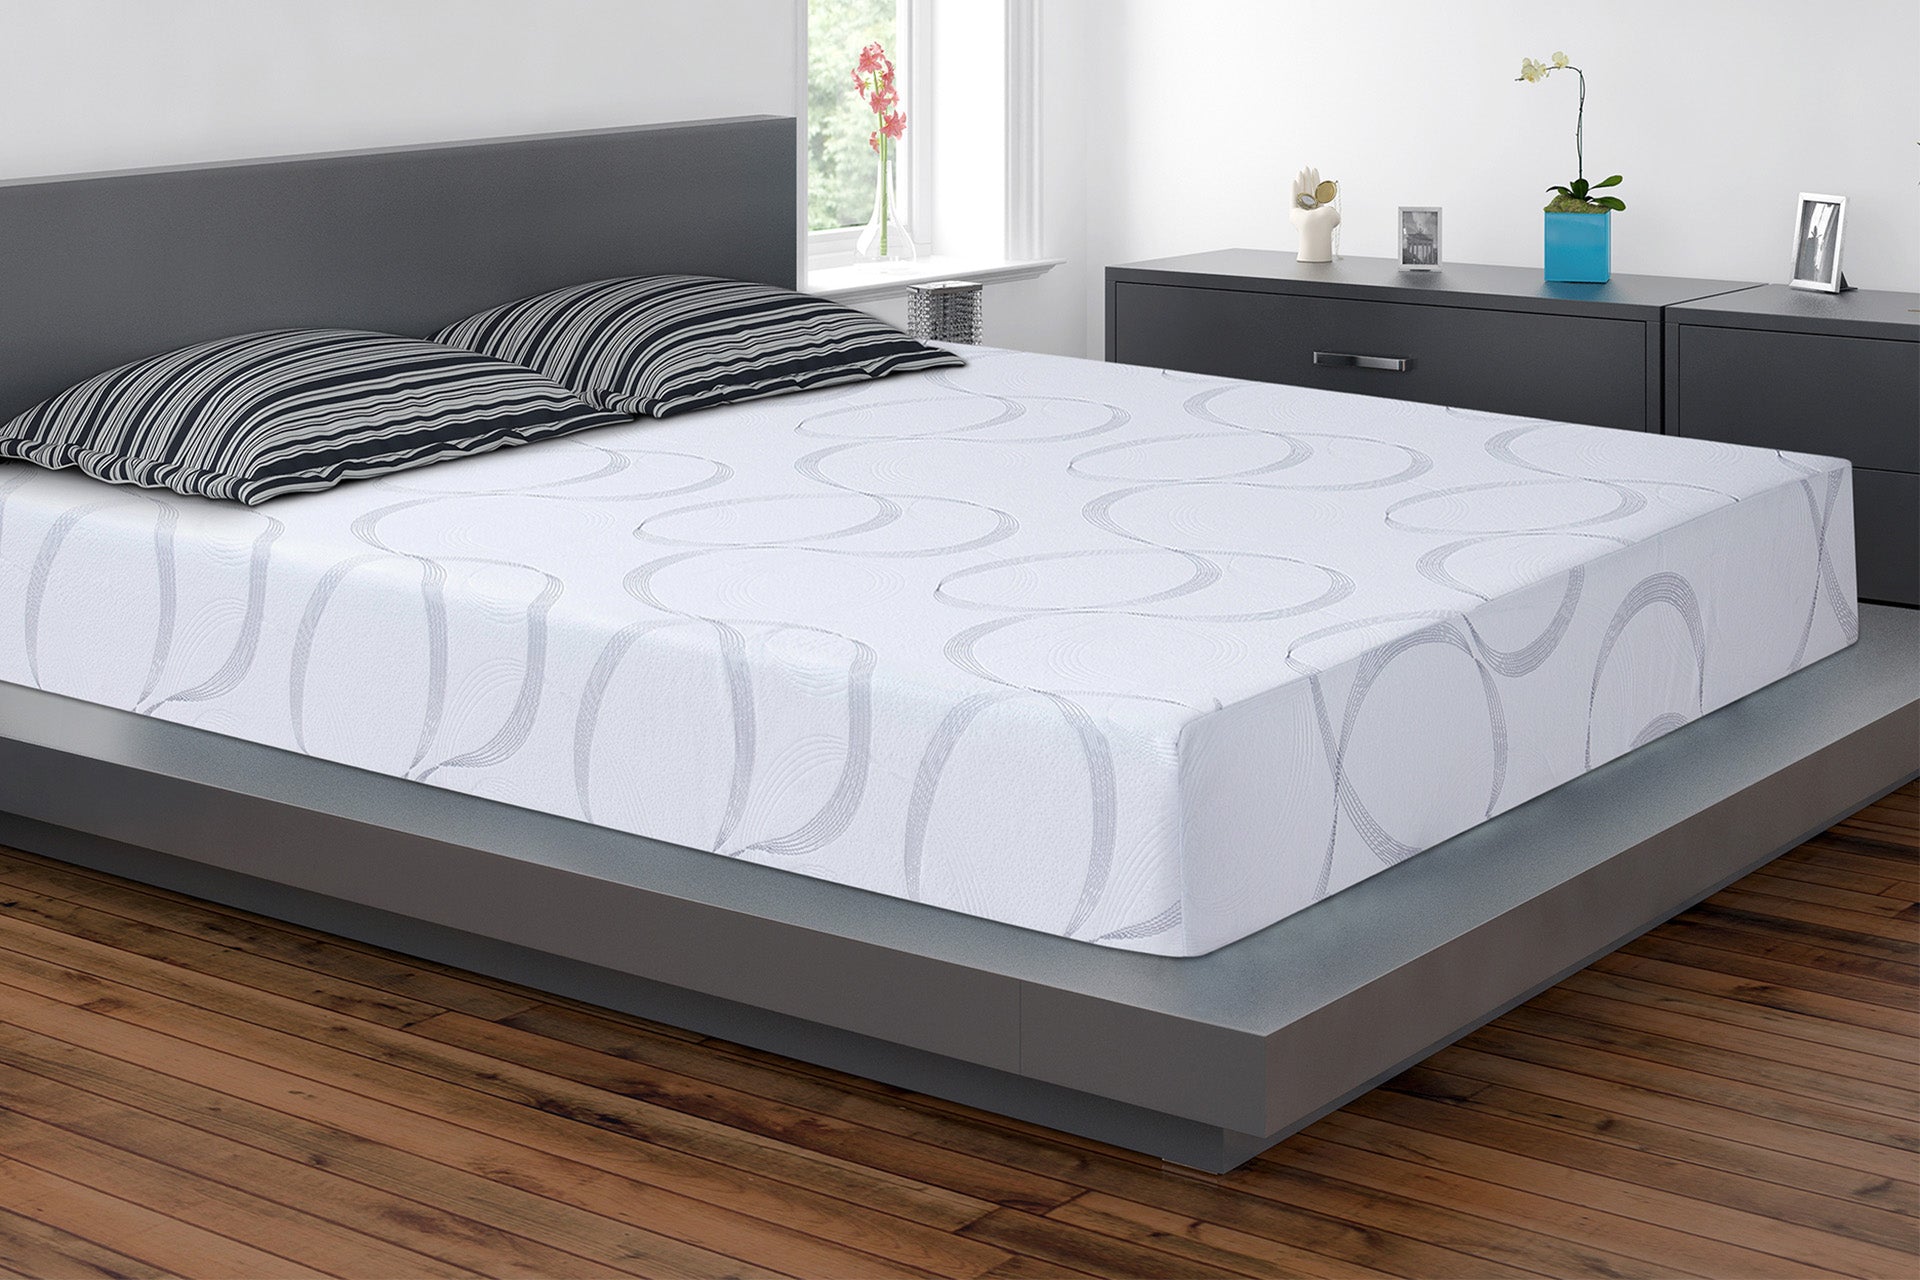 Do You Need a Boxspring with A Memory Foam Mattress For Your Bed?